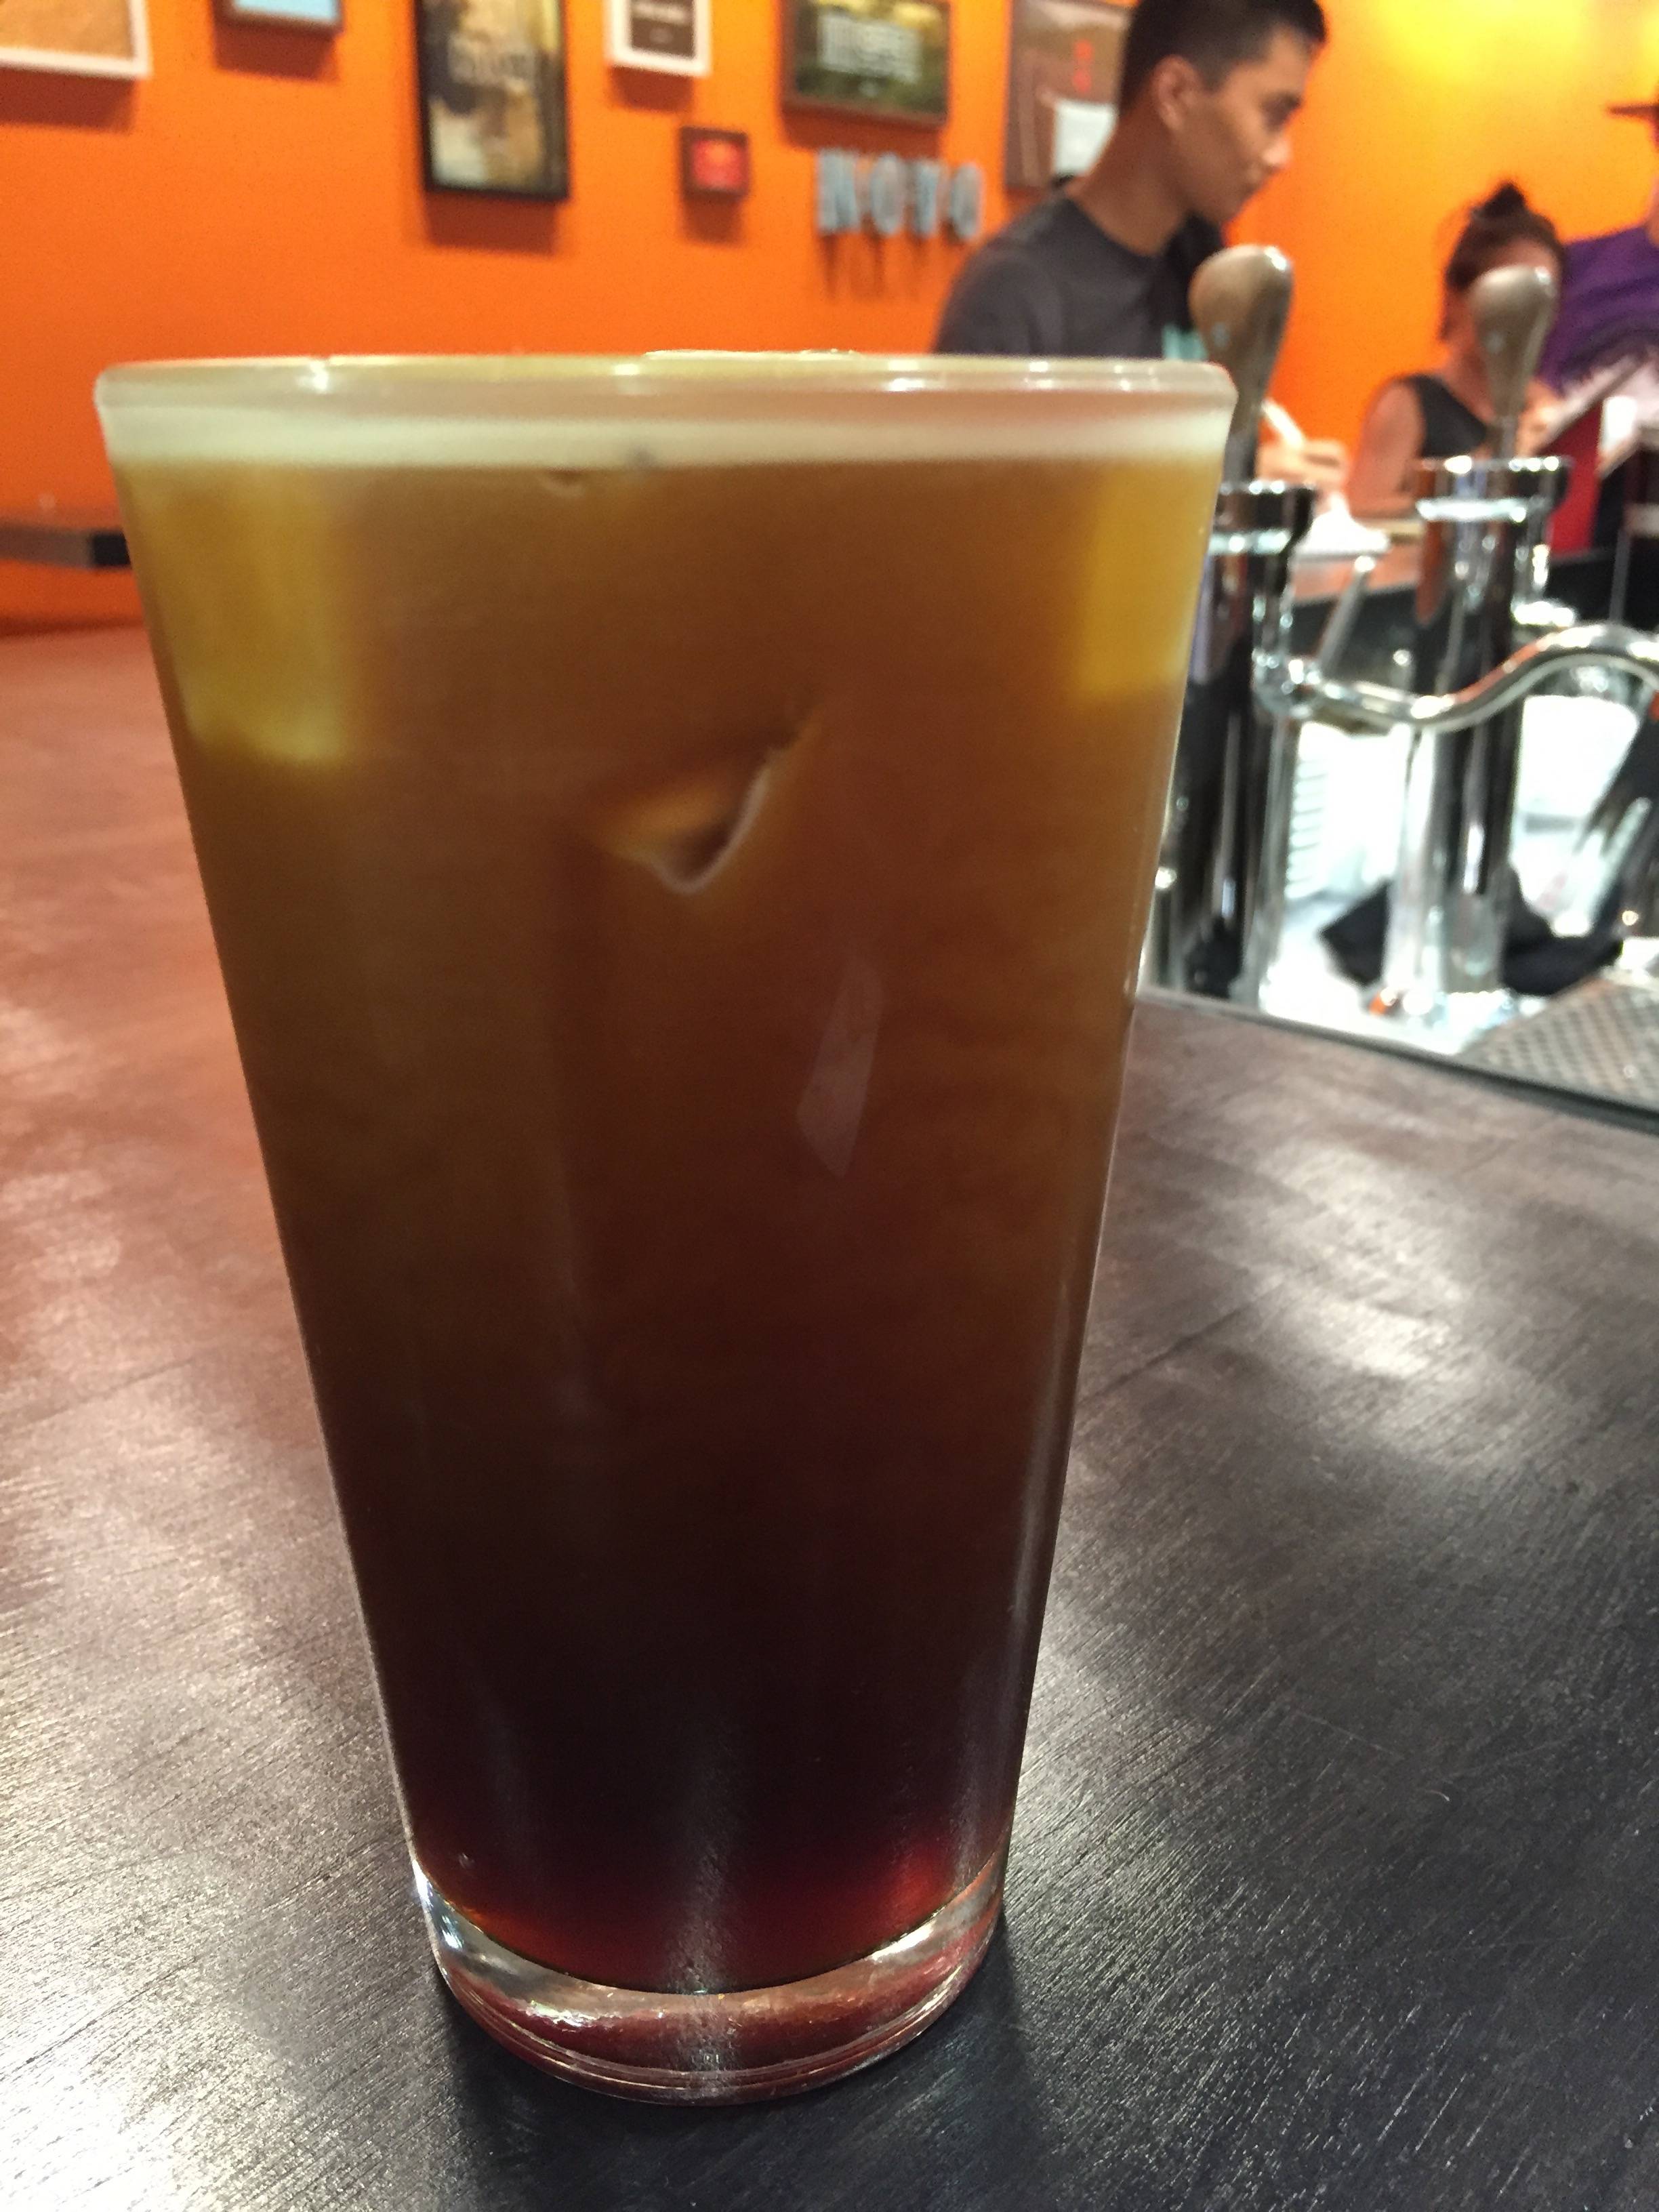 I have a beertender tab which I haven't used in 5 years anyone know if it's  possible to modify /DIY/ it for it to be able to poor nitro cold brew ? 